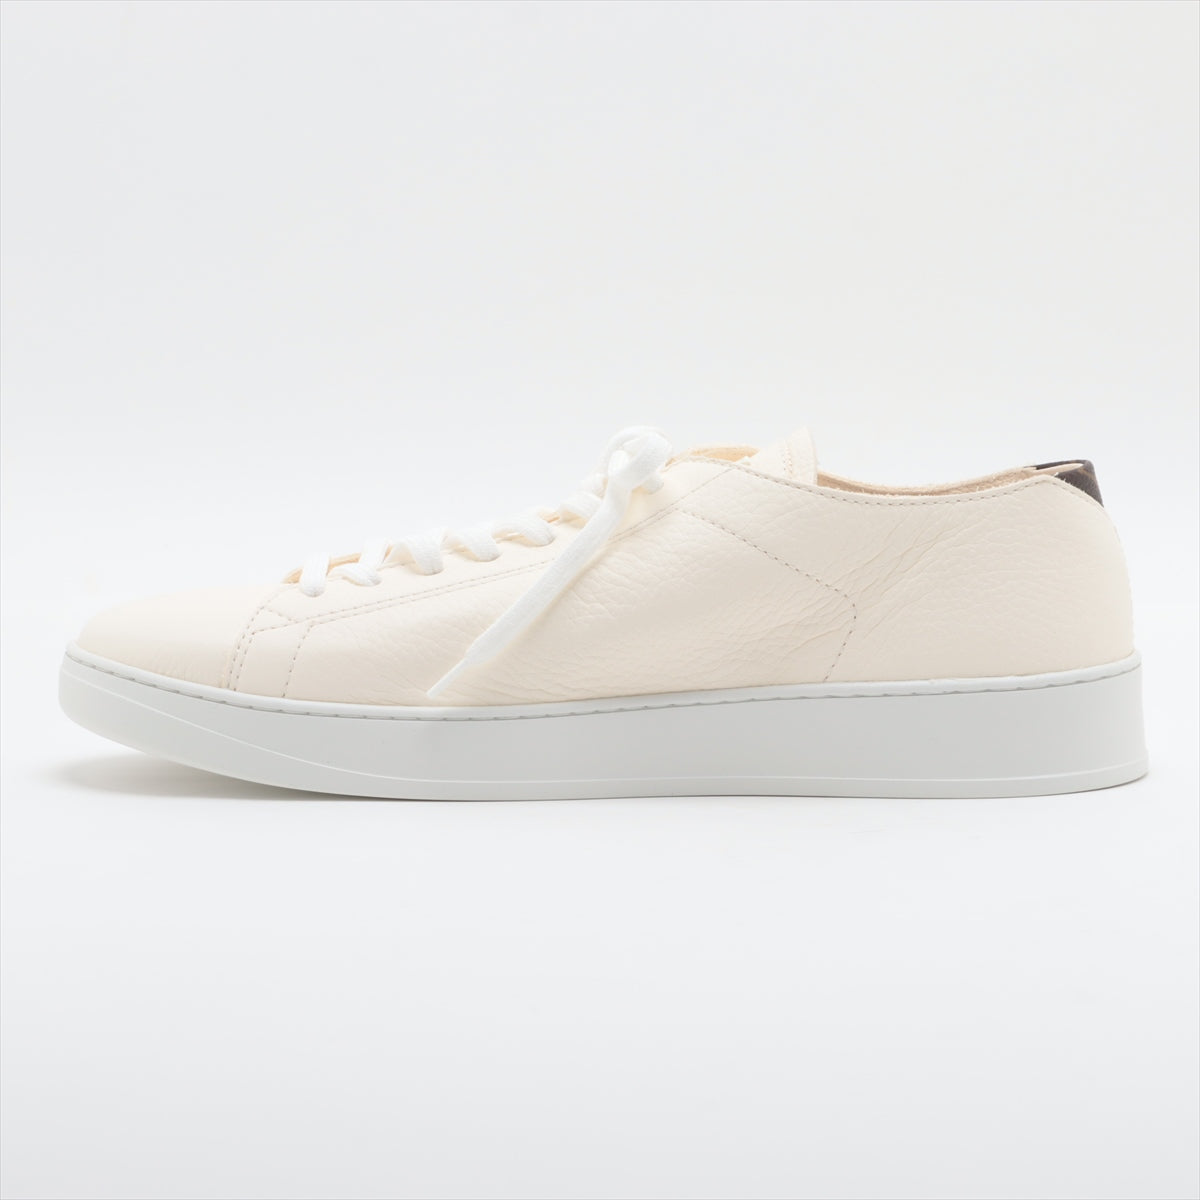 Louis Vuitton LV Resort Line 22 years Leather Sneakers 10 Men's Ivory MS0292